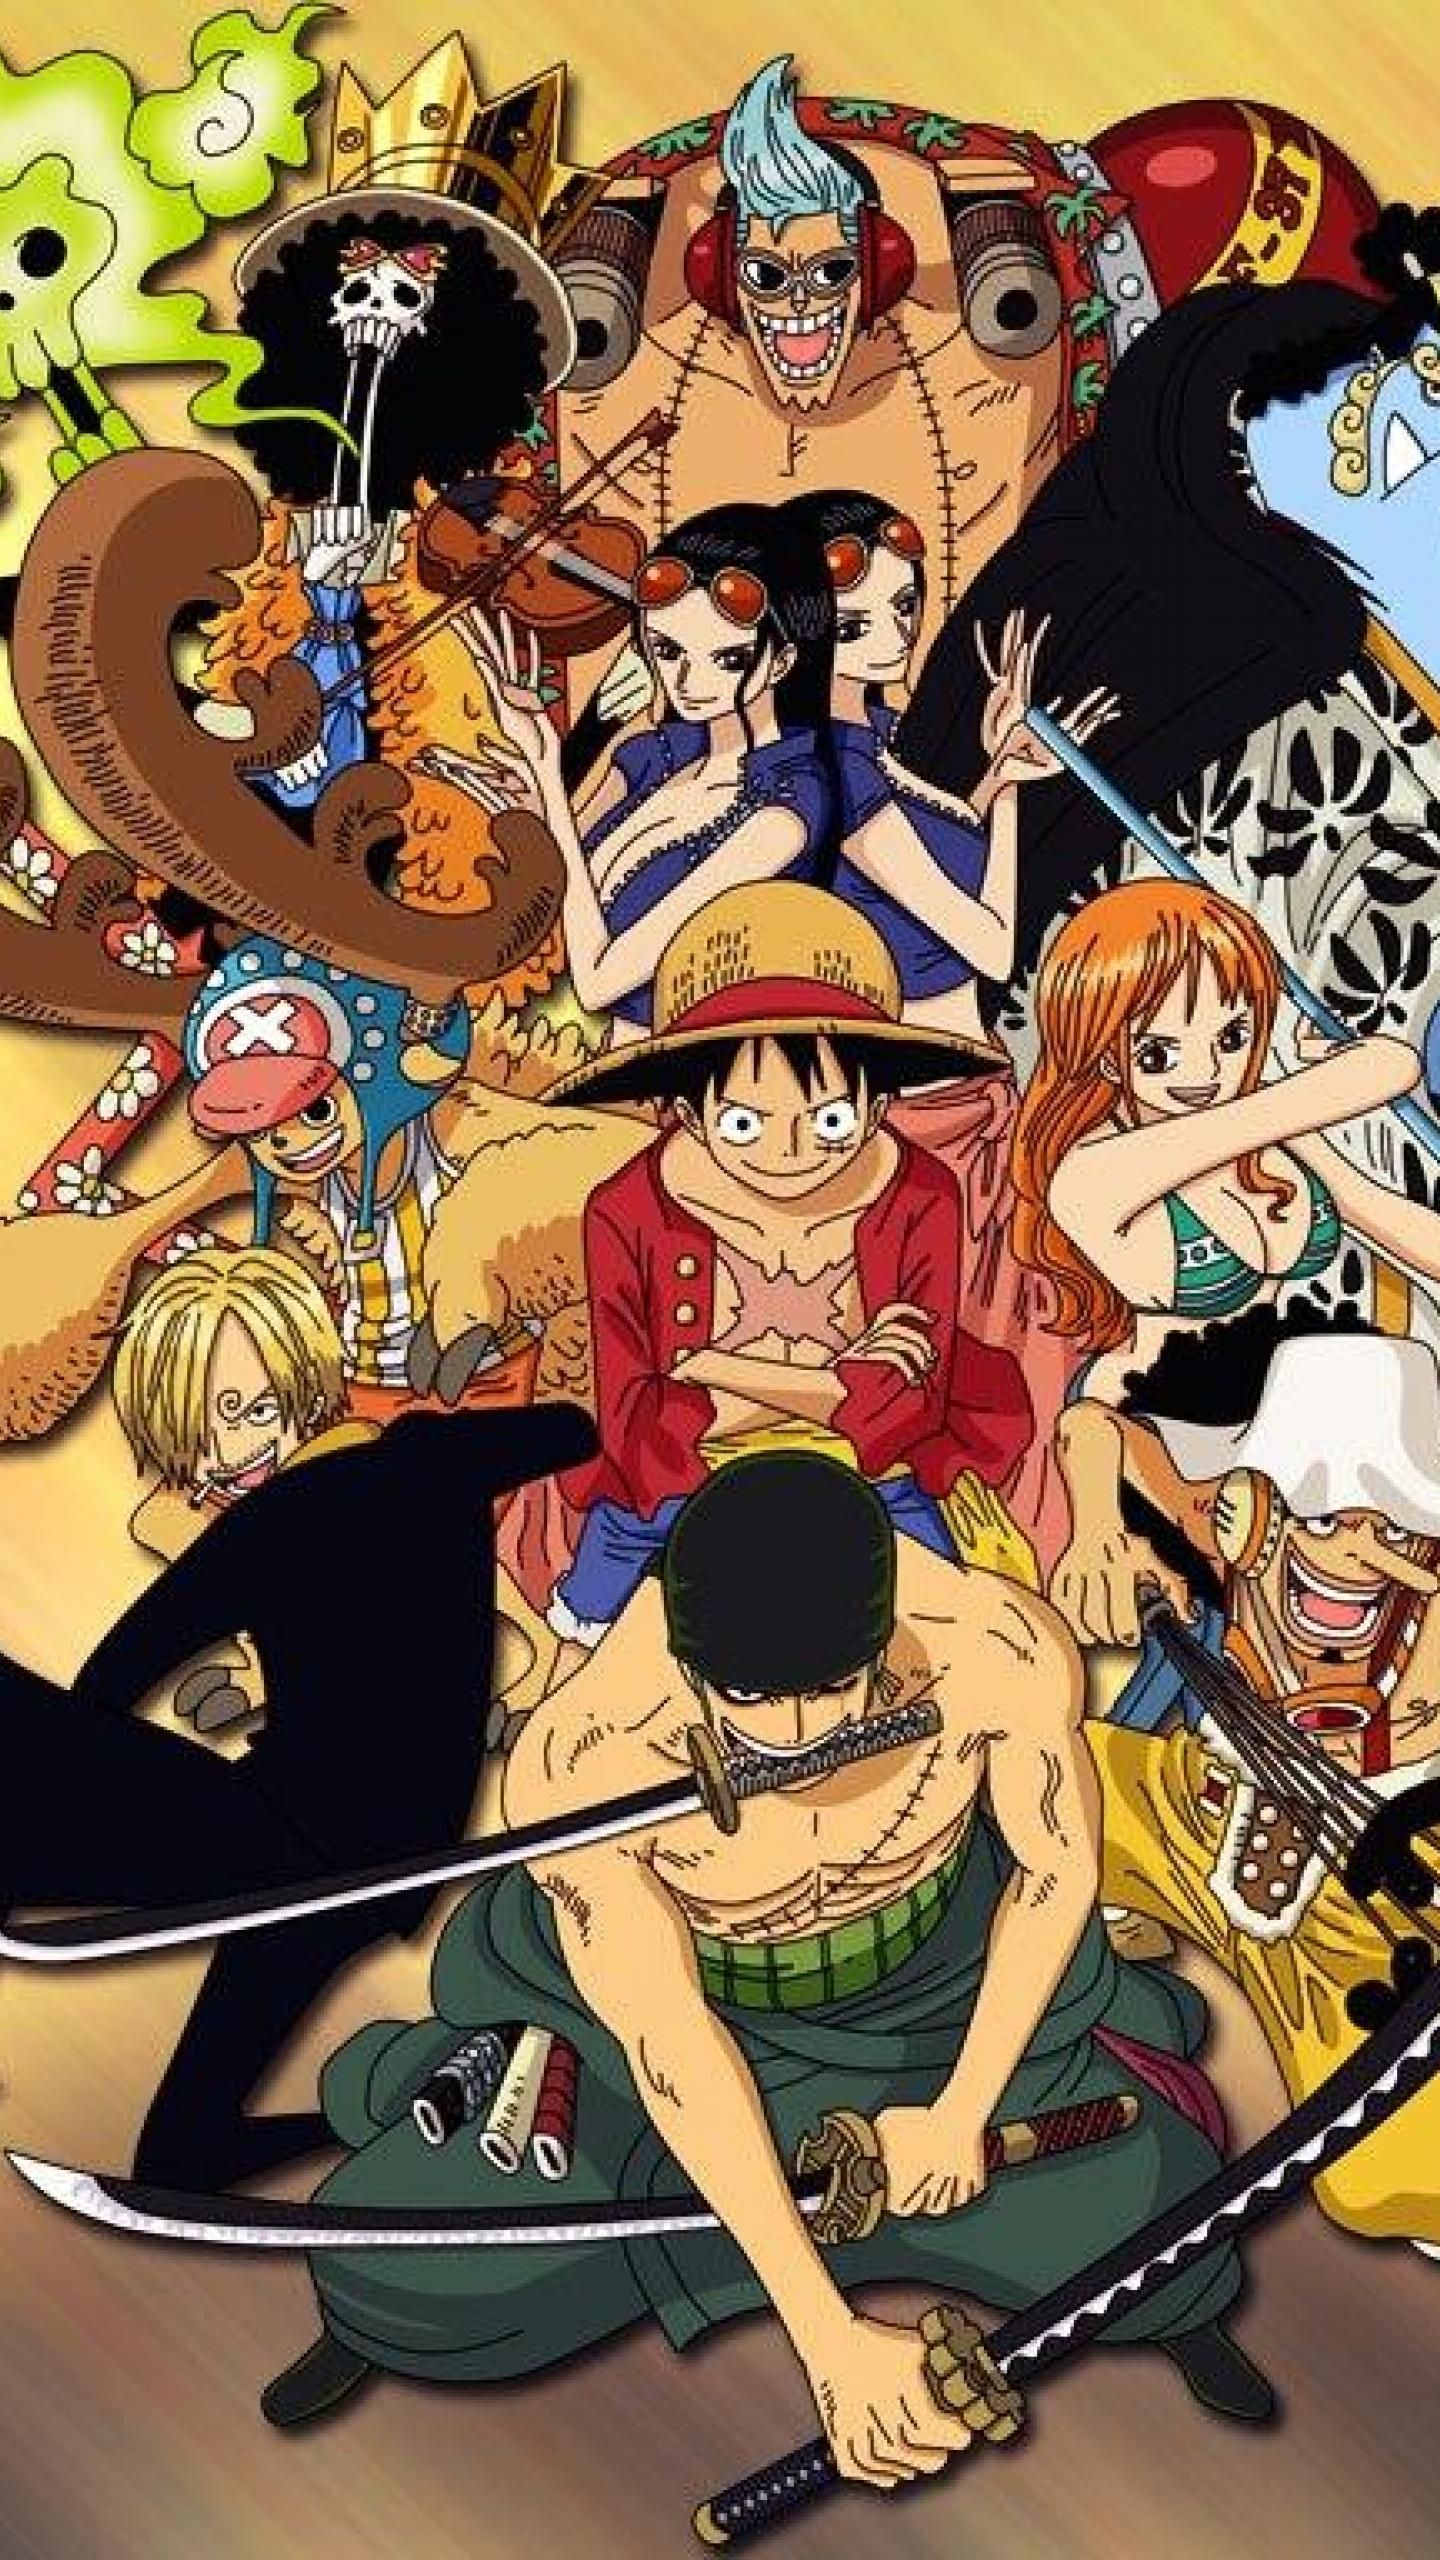 One Piece Anime Wallpaper HD For Mobile. Anime wallpaper, Wallpaper, One piece nami